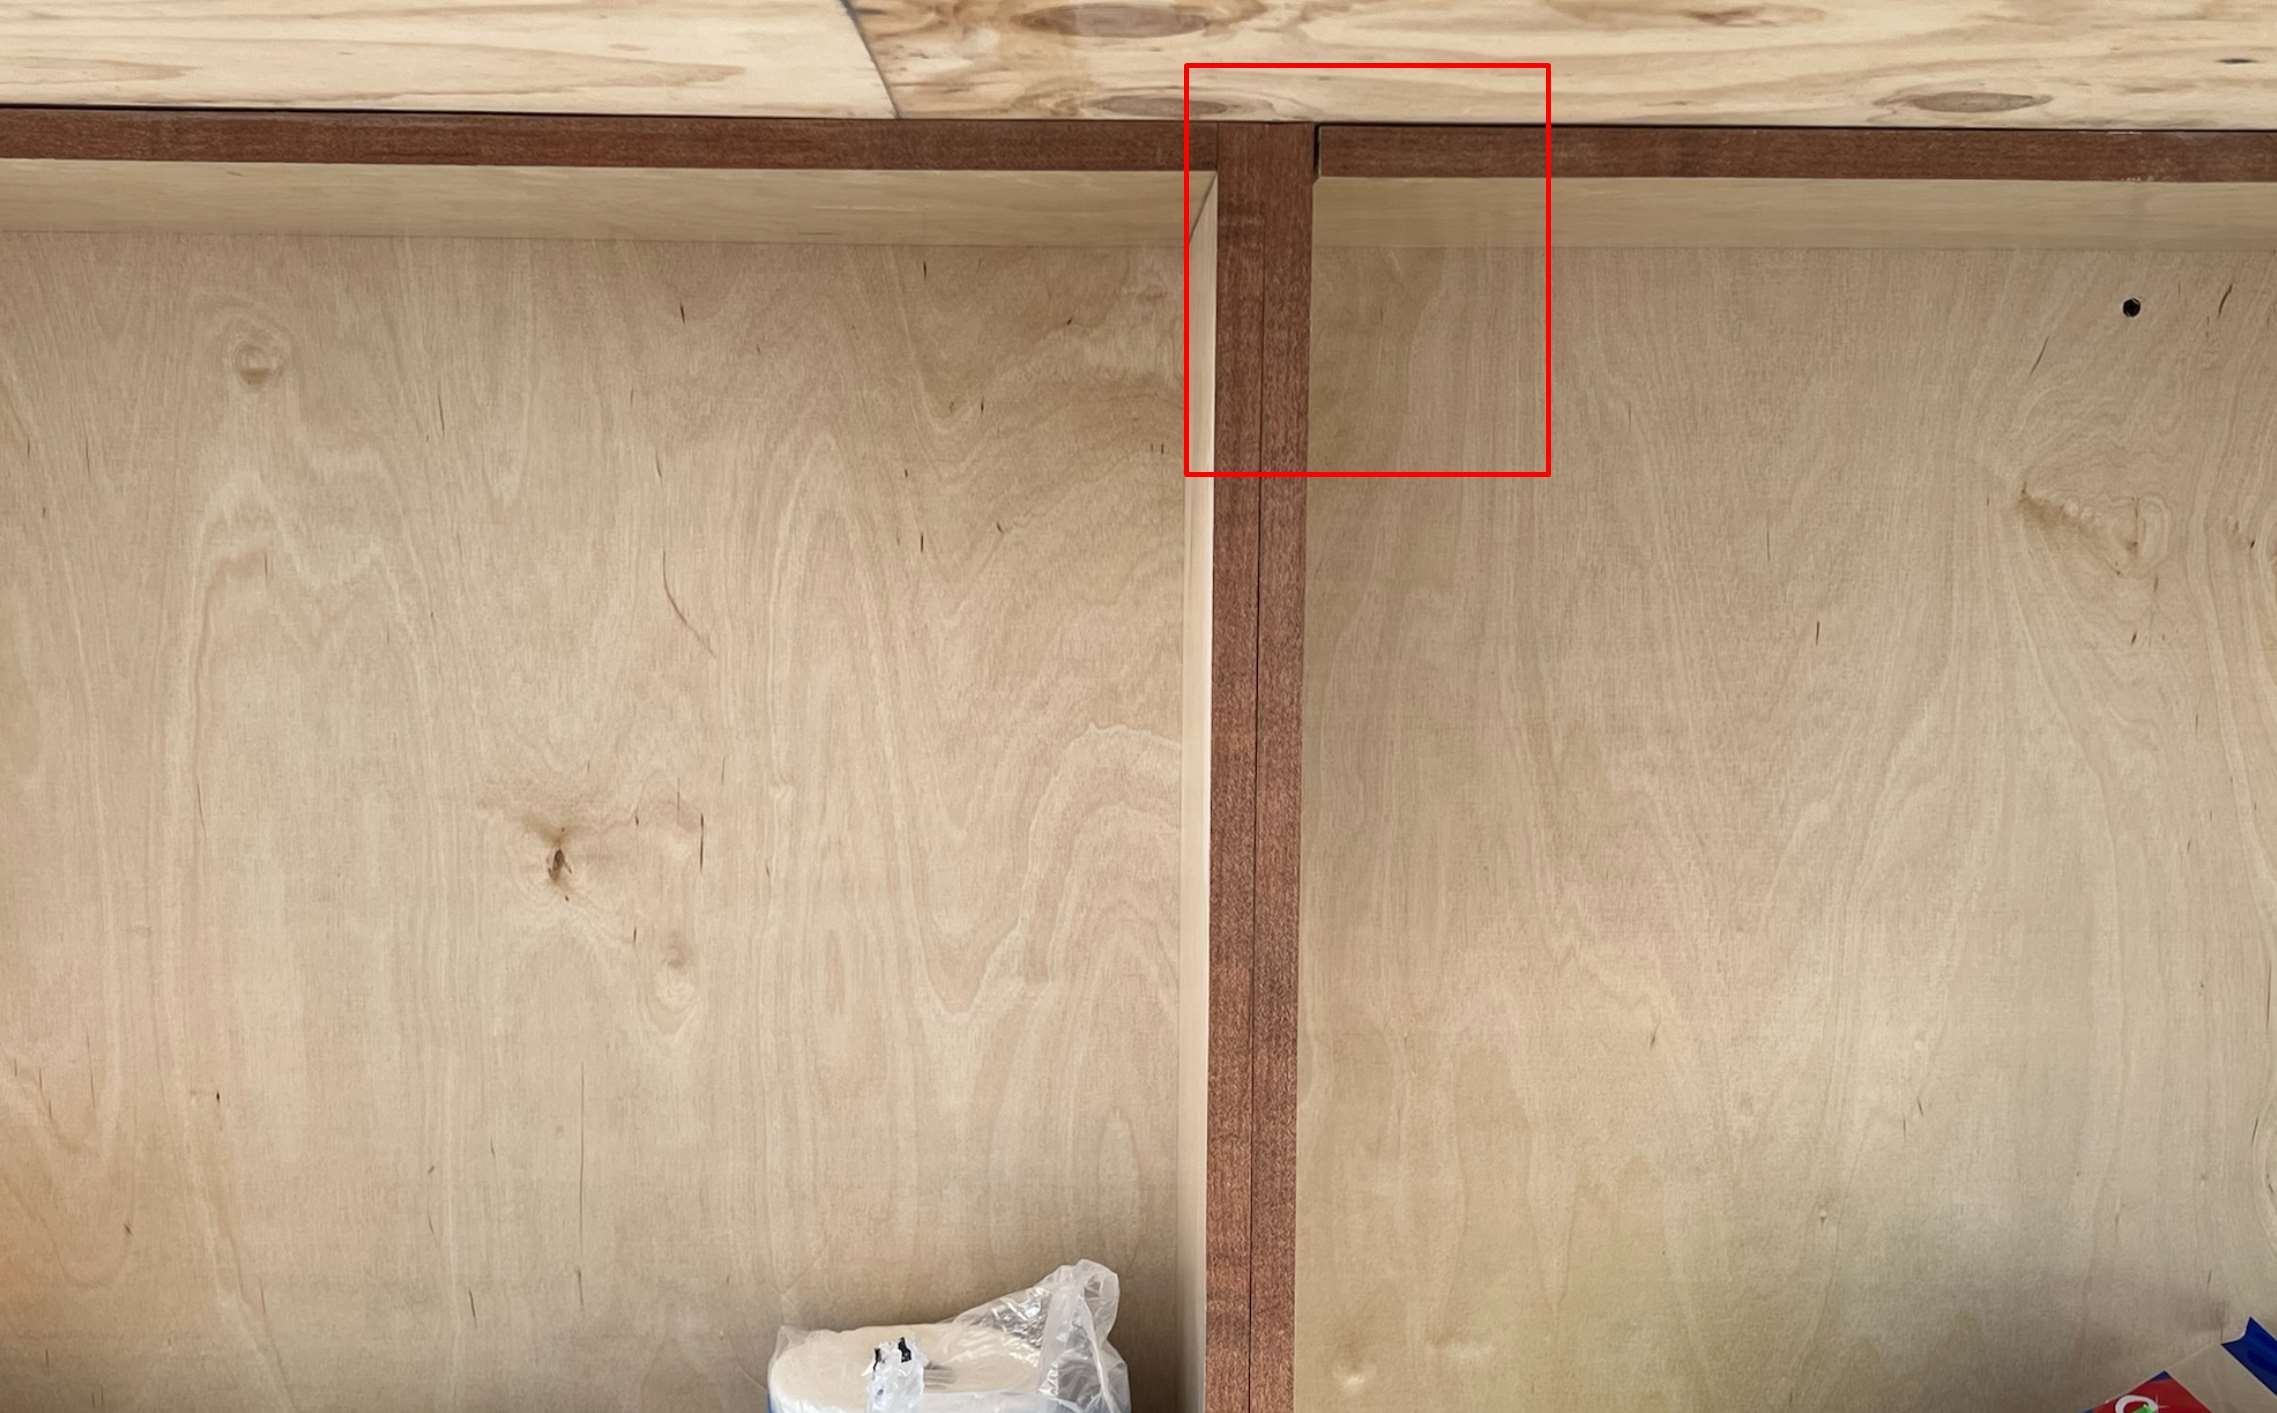 installed crooked with gaps